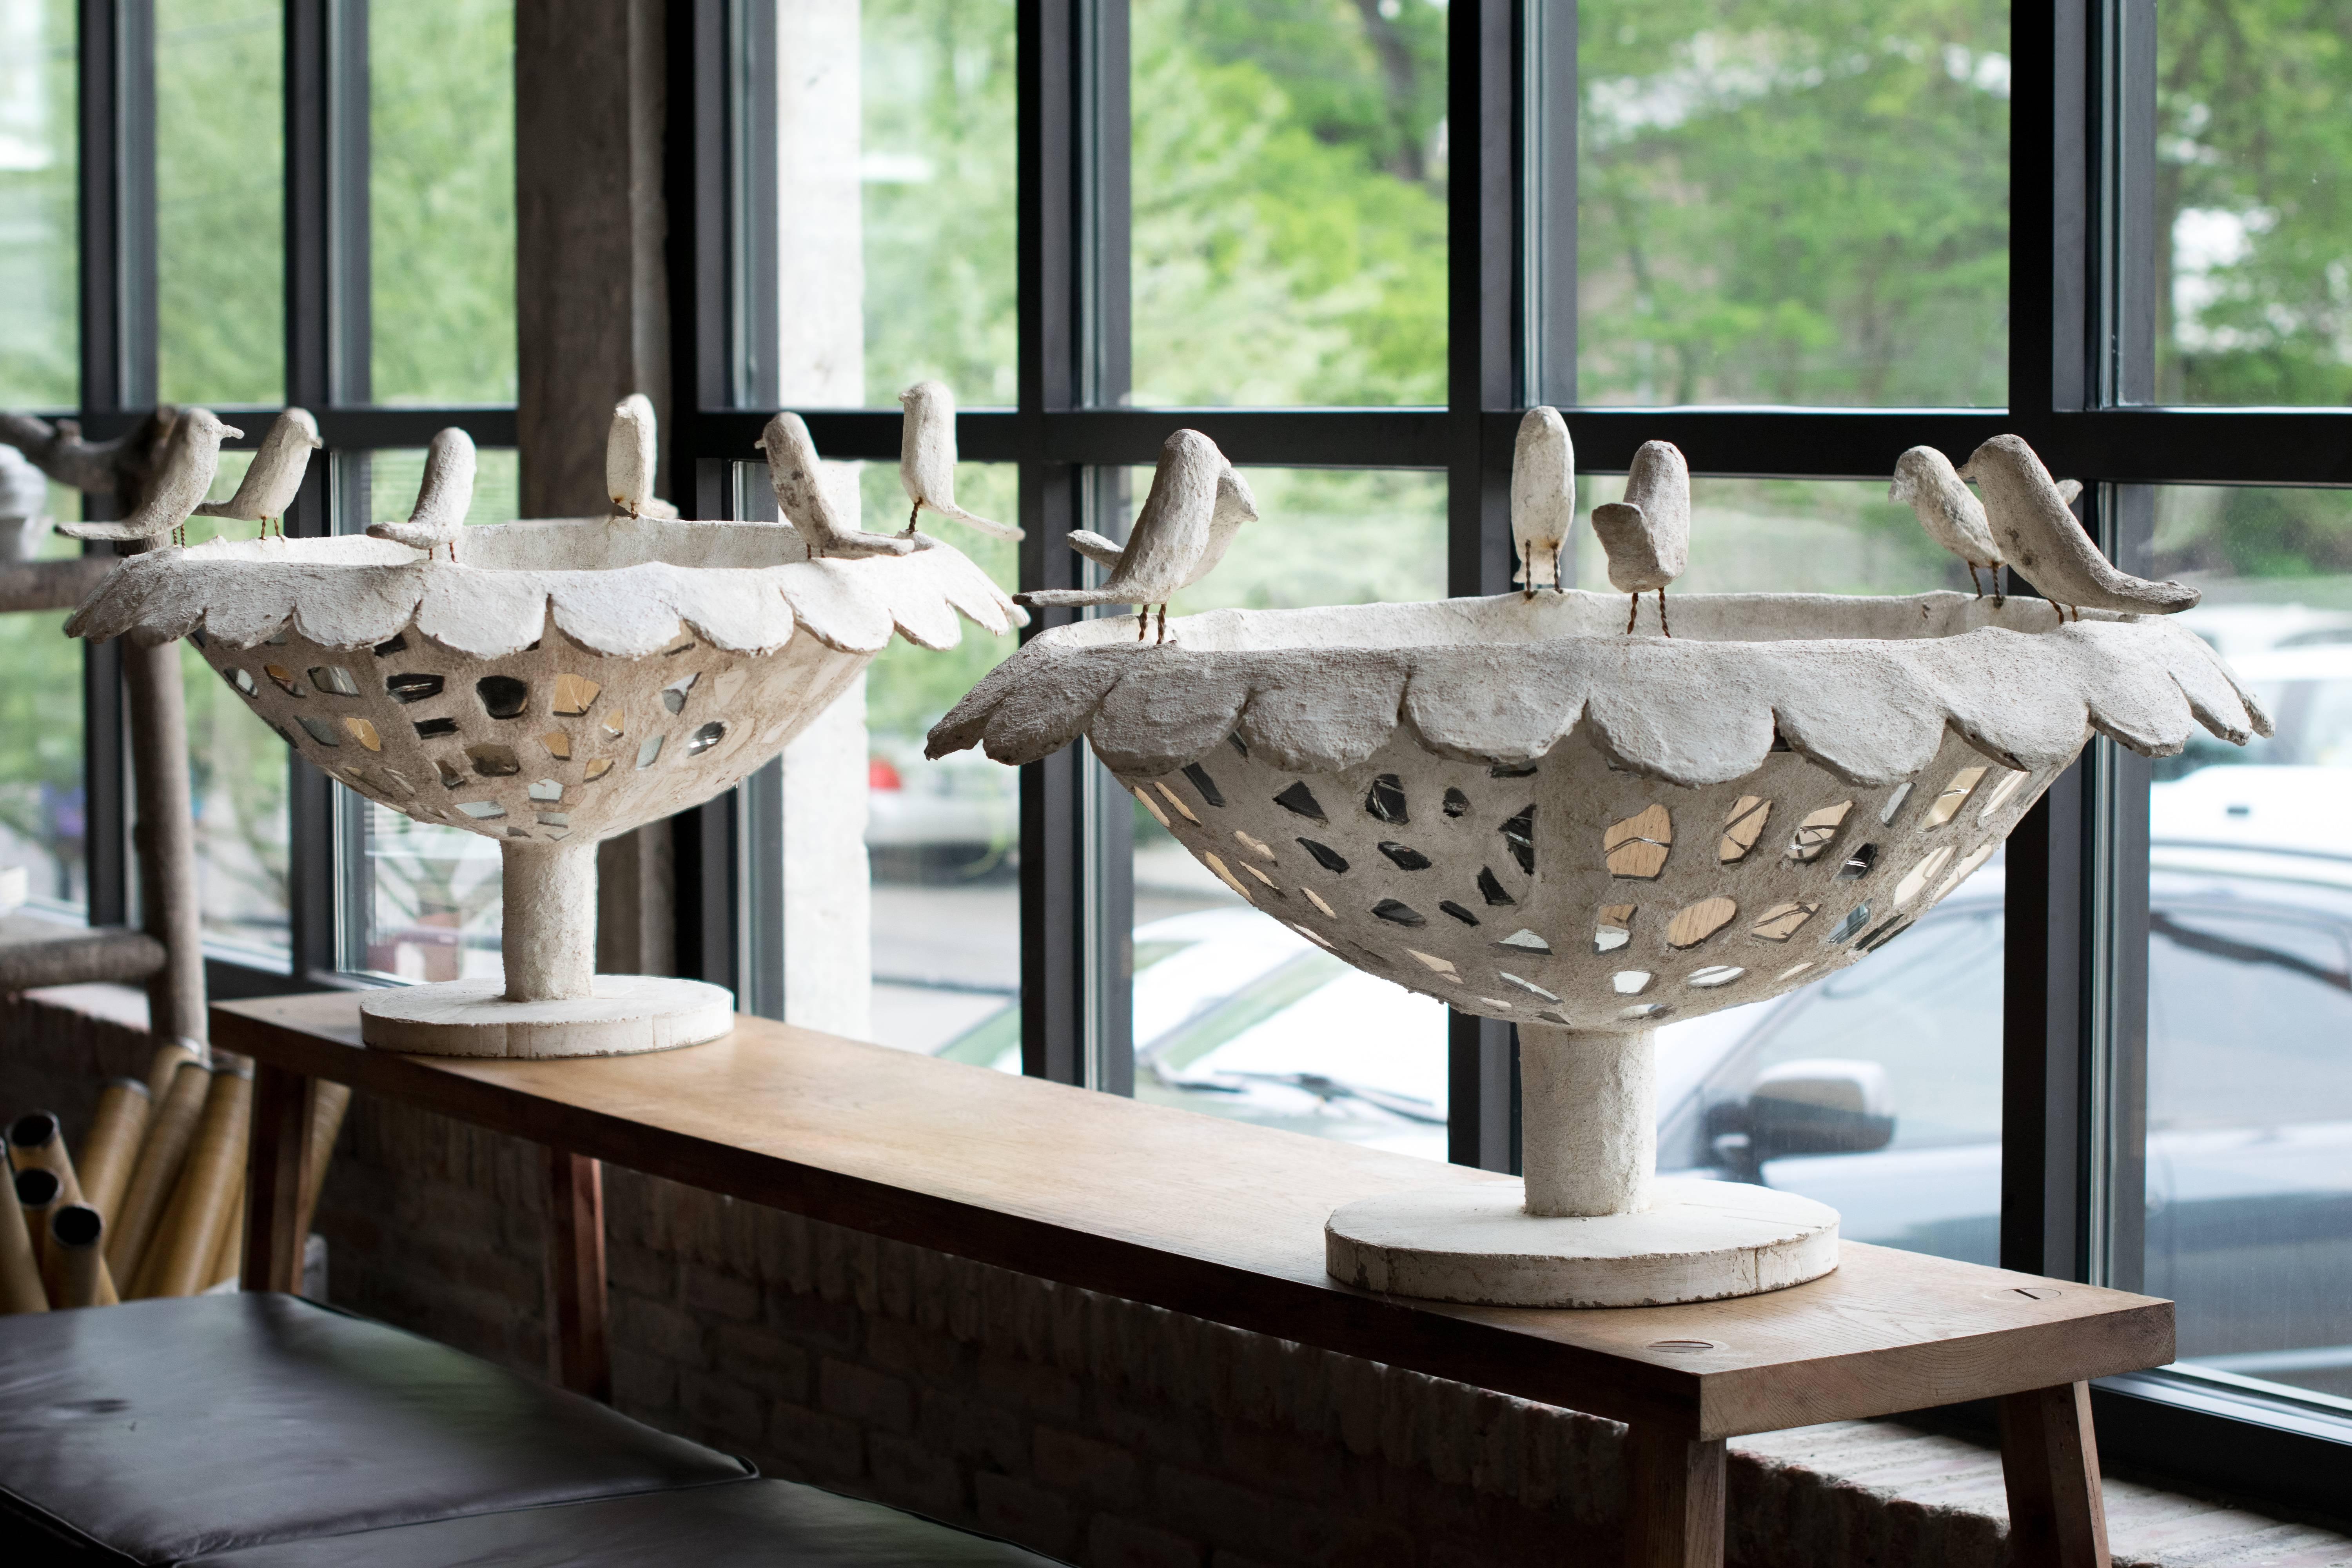 Beauty and whimsy expressed in this highly collectable pair of 3' birdbaths / sculptures by Cantral Valdez, mid-century masonry sculptor from San Antonio, Texas.  Whitewashed cement over wire with inlayed mirrors. Second pair available with fully